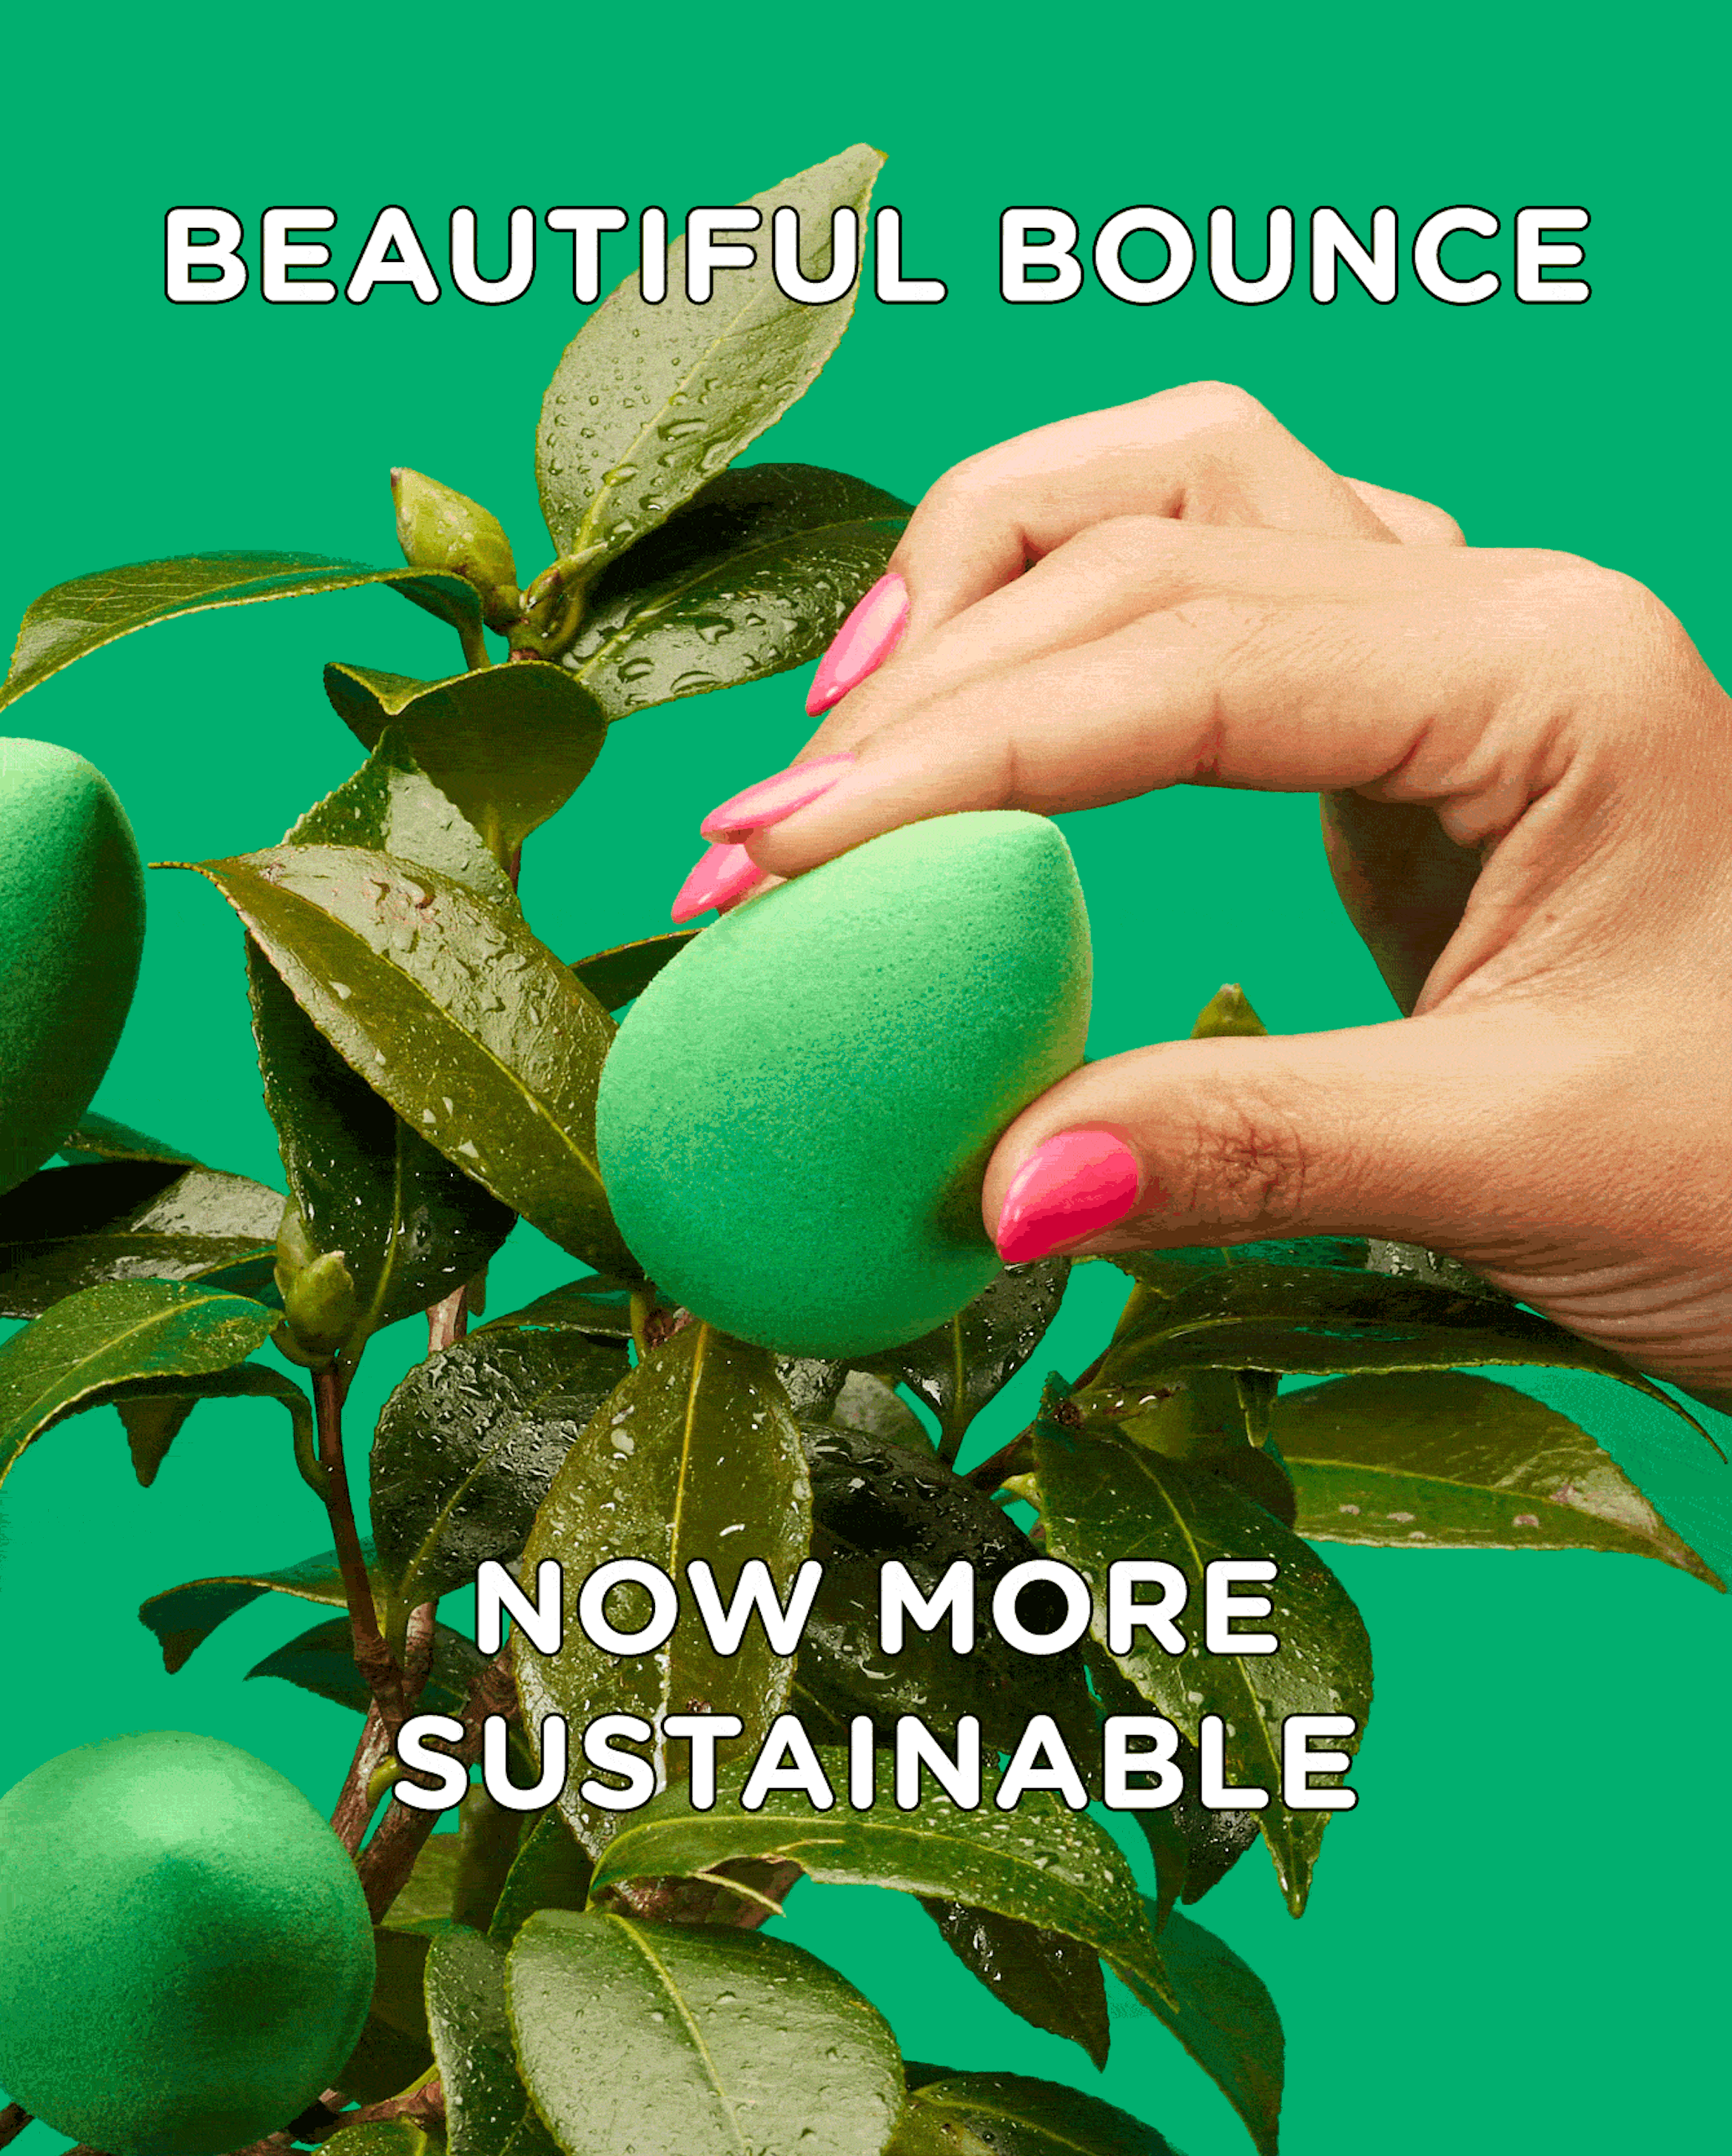 Text, Beautiful bounce, now more sustainable Description, Models hand squeezes the green beauty blender to show products bounce